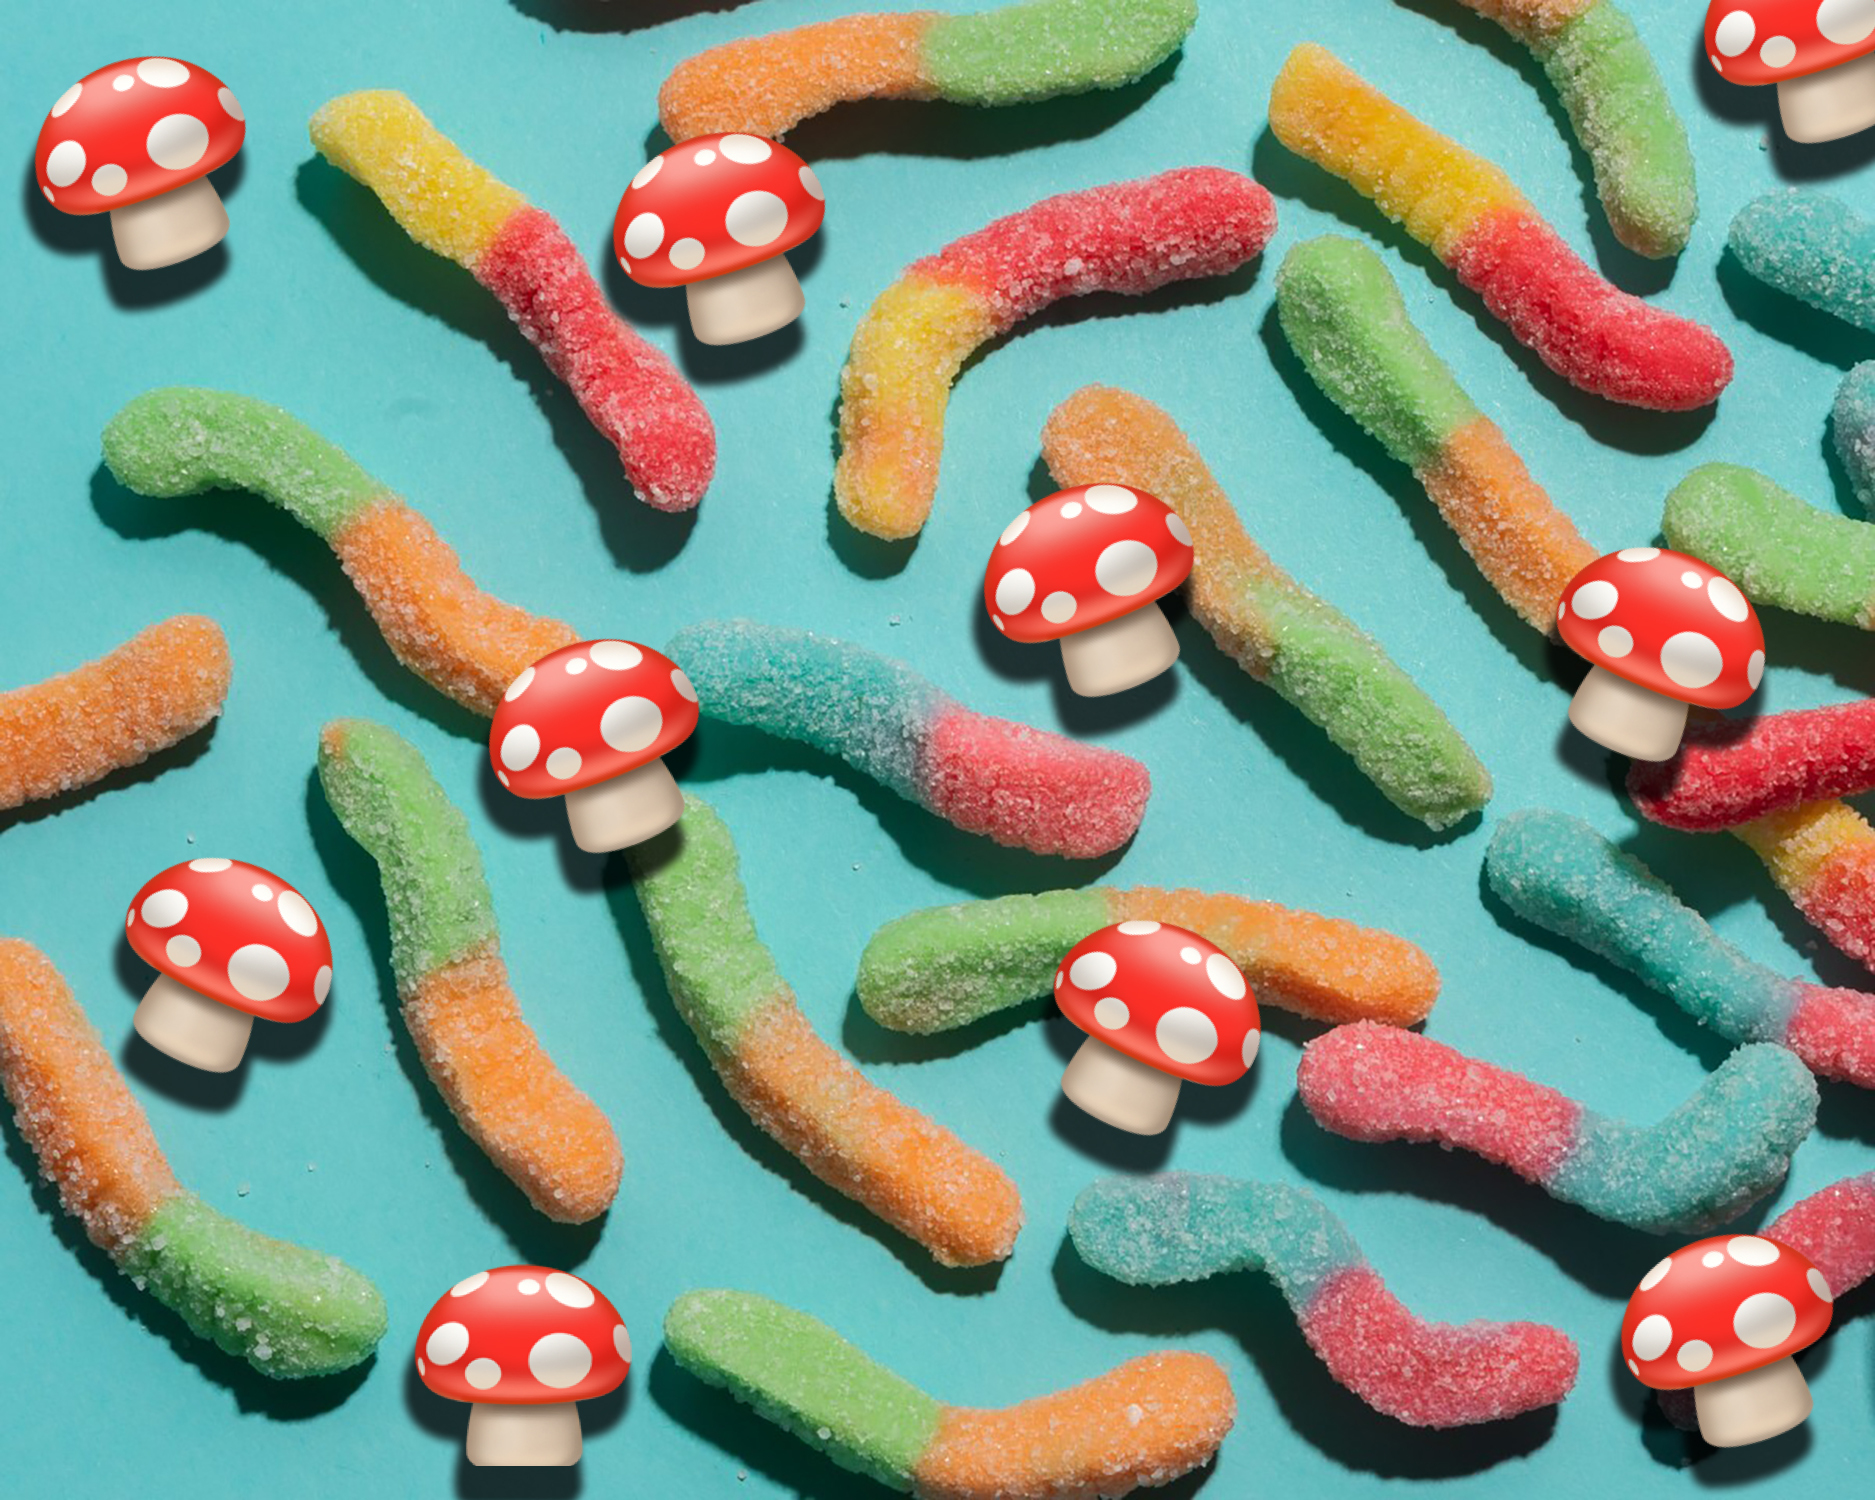 Shroom Gummies: What Are the Benefits of Consuming Psilocybin Mushrooms This Way?